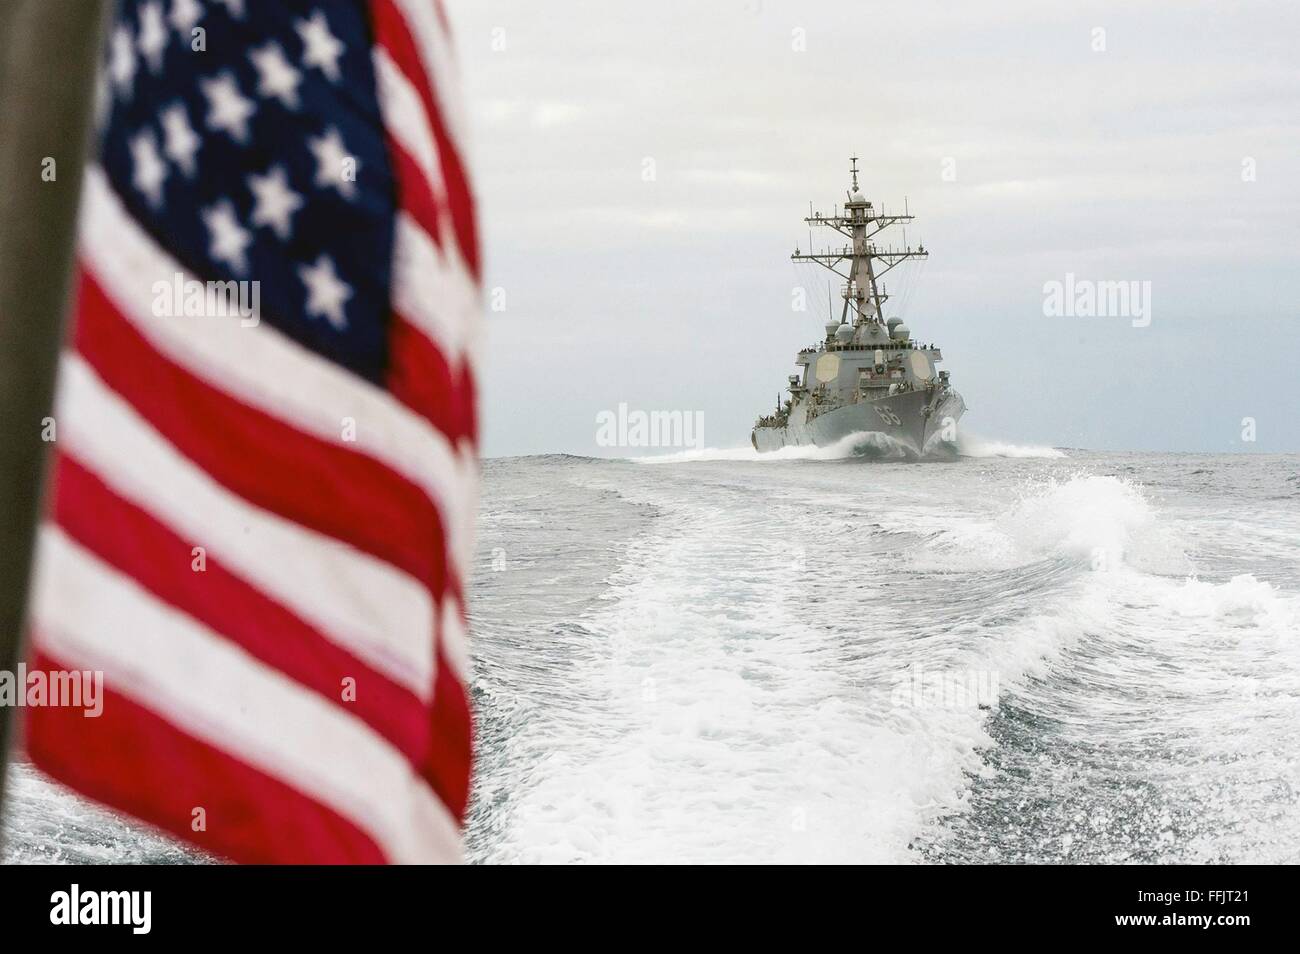 U.S Navy Arleigh Burke-class guided missile destroyer USS Gonzalez during operations January 27, 2016 in the Indian Ocean. Stock Photo